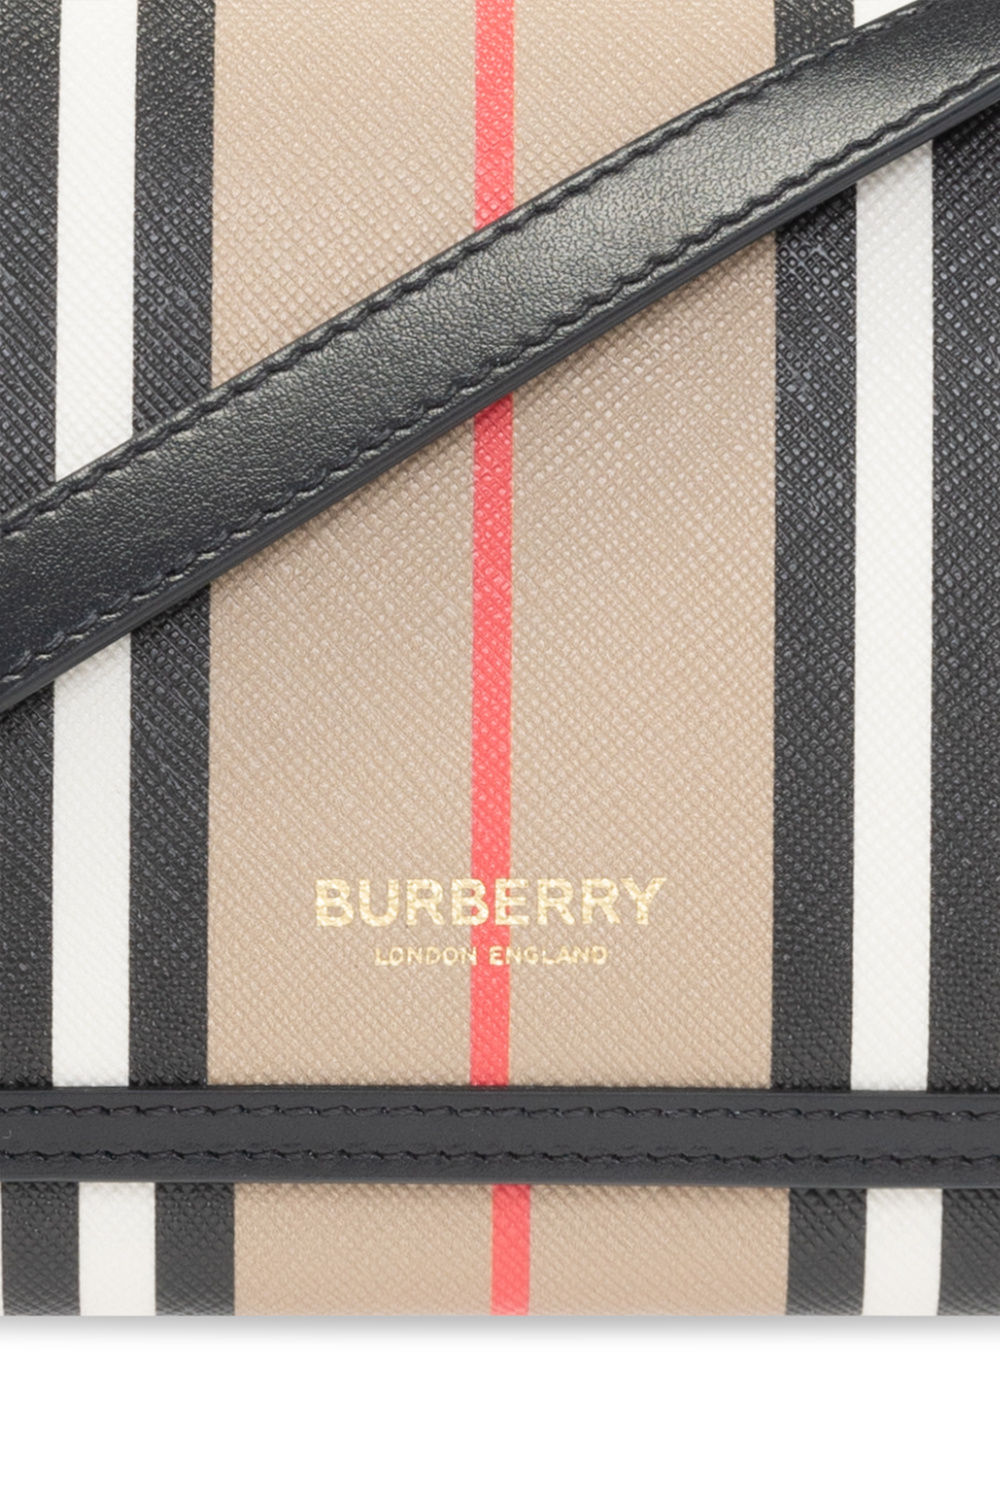 Burberry Wallet with shoulder strap, Women's Accessories